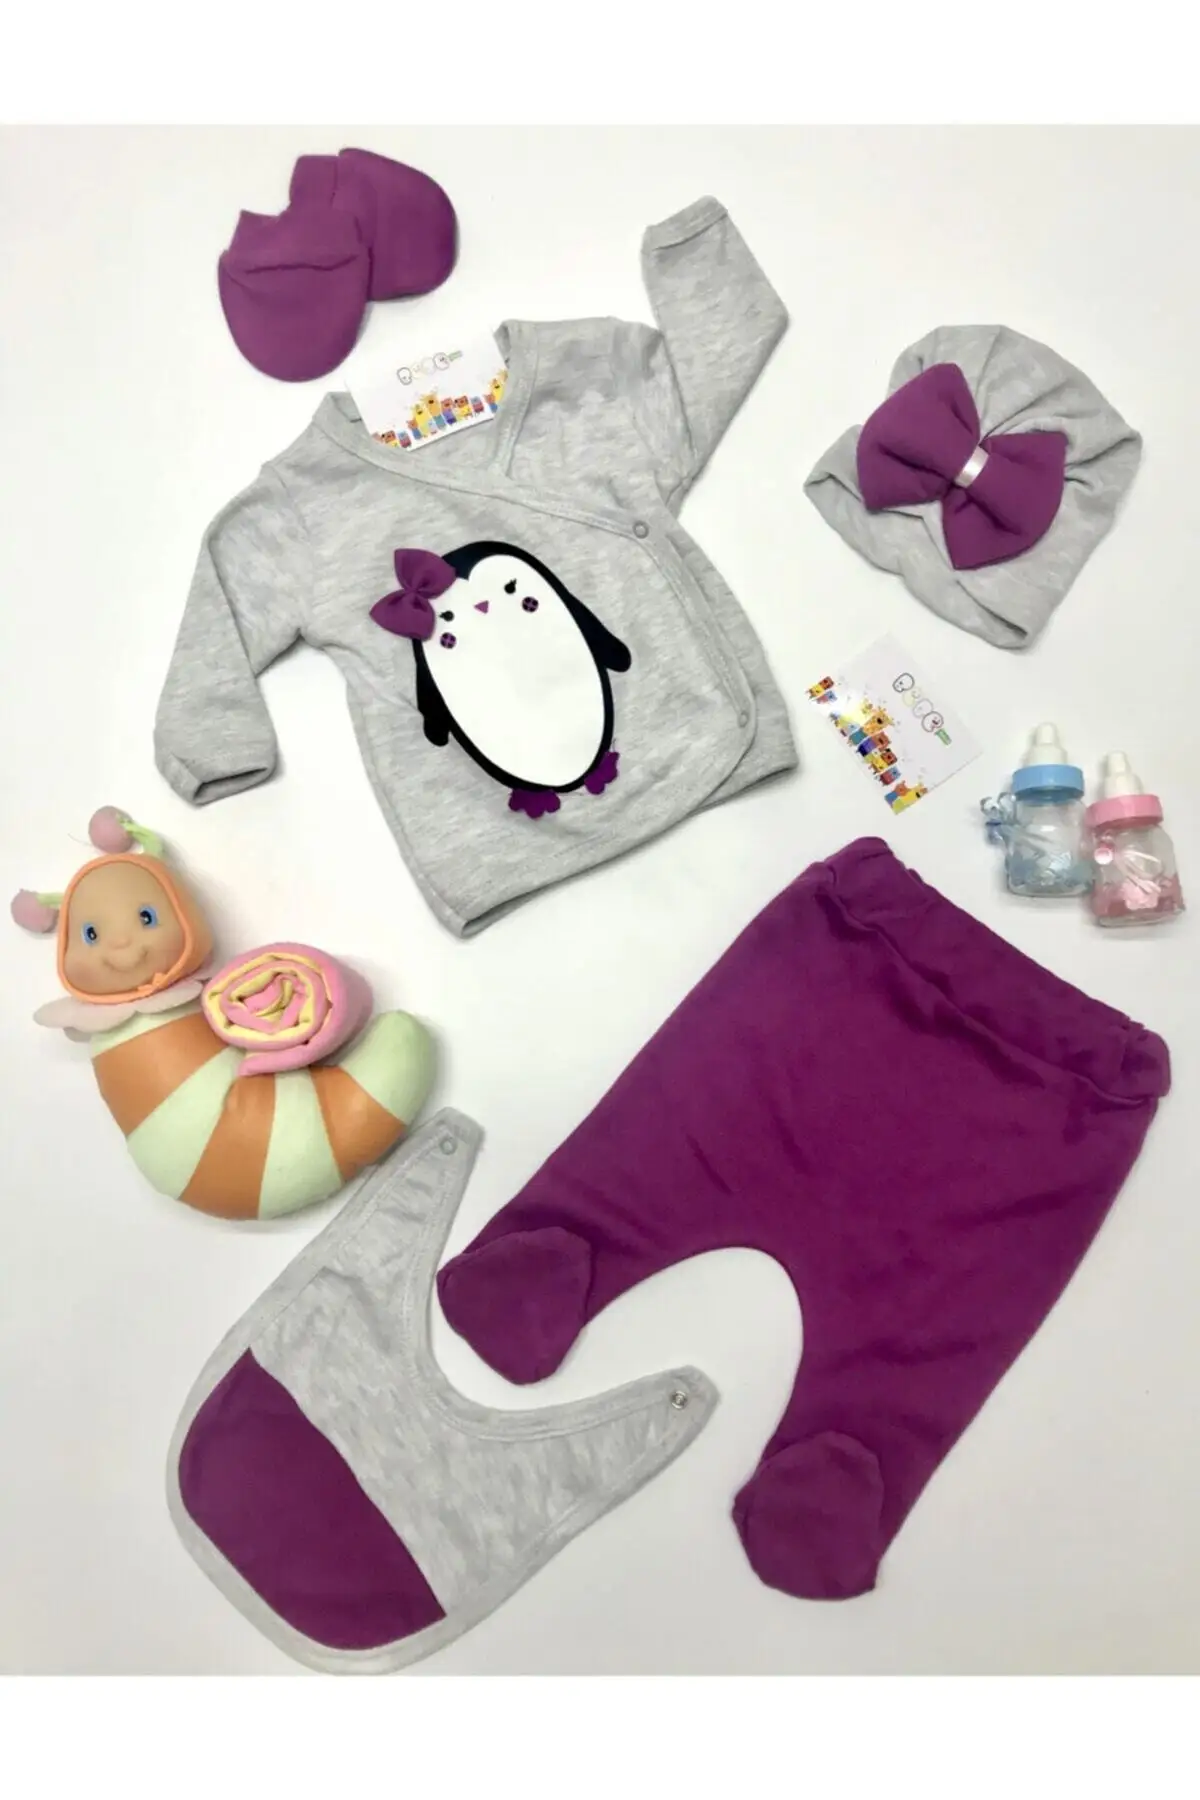 

Newborn Essentials Penguin Embroidery Baby Girl Clothing 5 Pcs Set Soft 100% Cotton Baby Gift Layette Hospital Outfit Baby Set